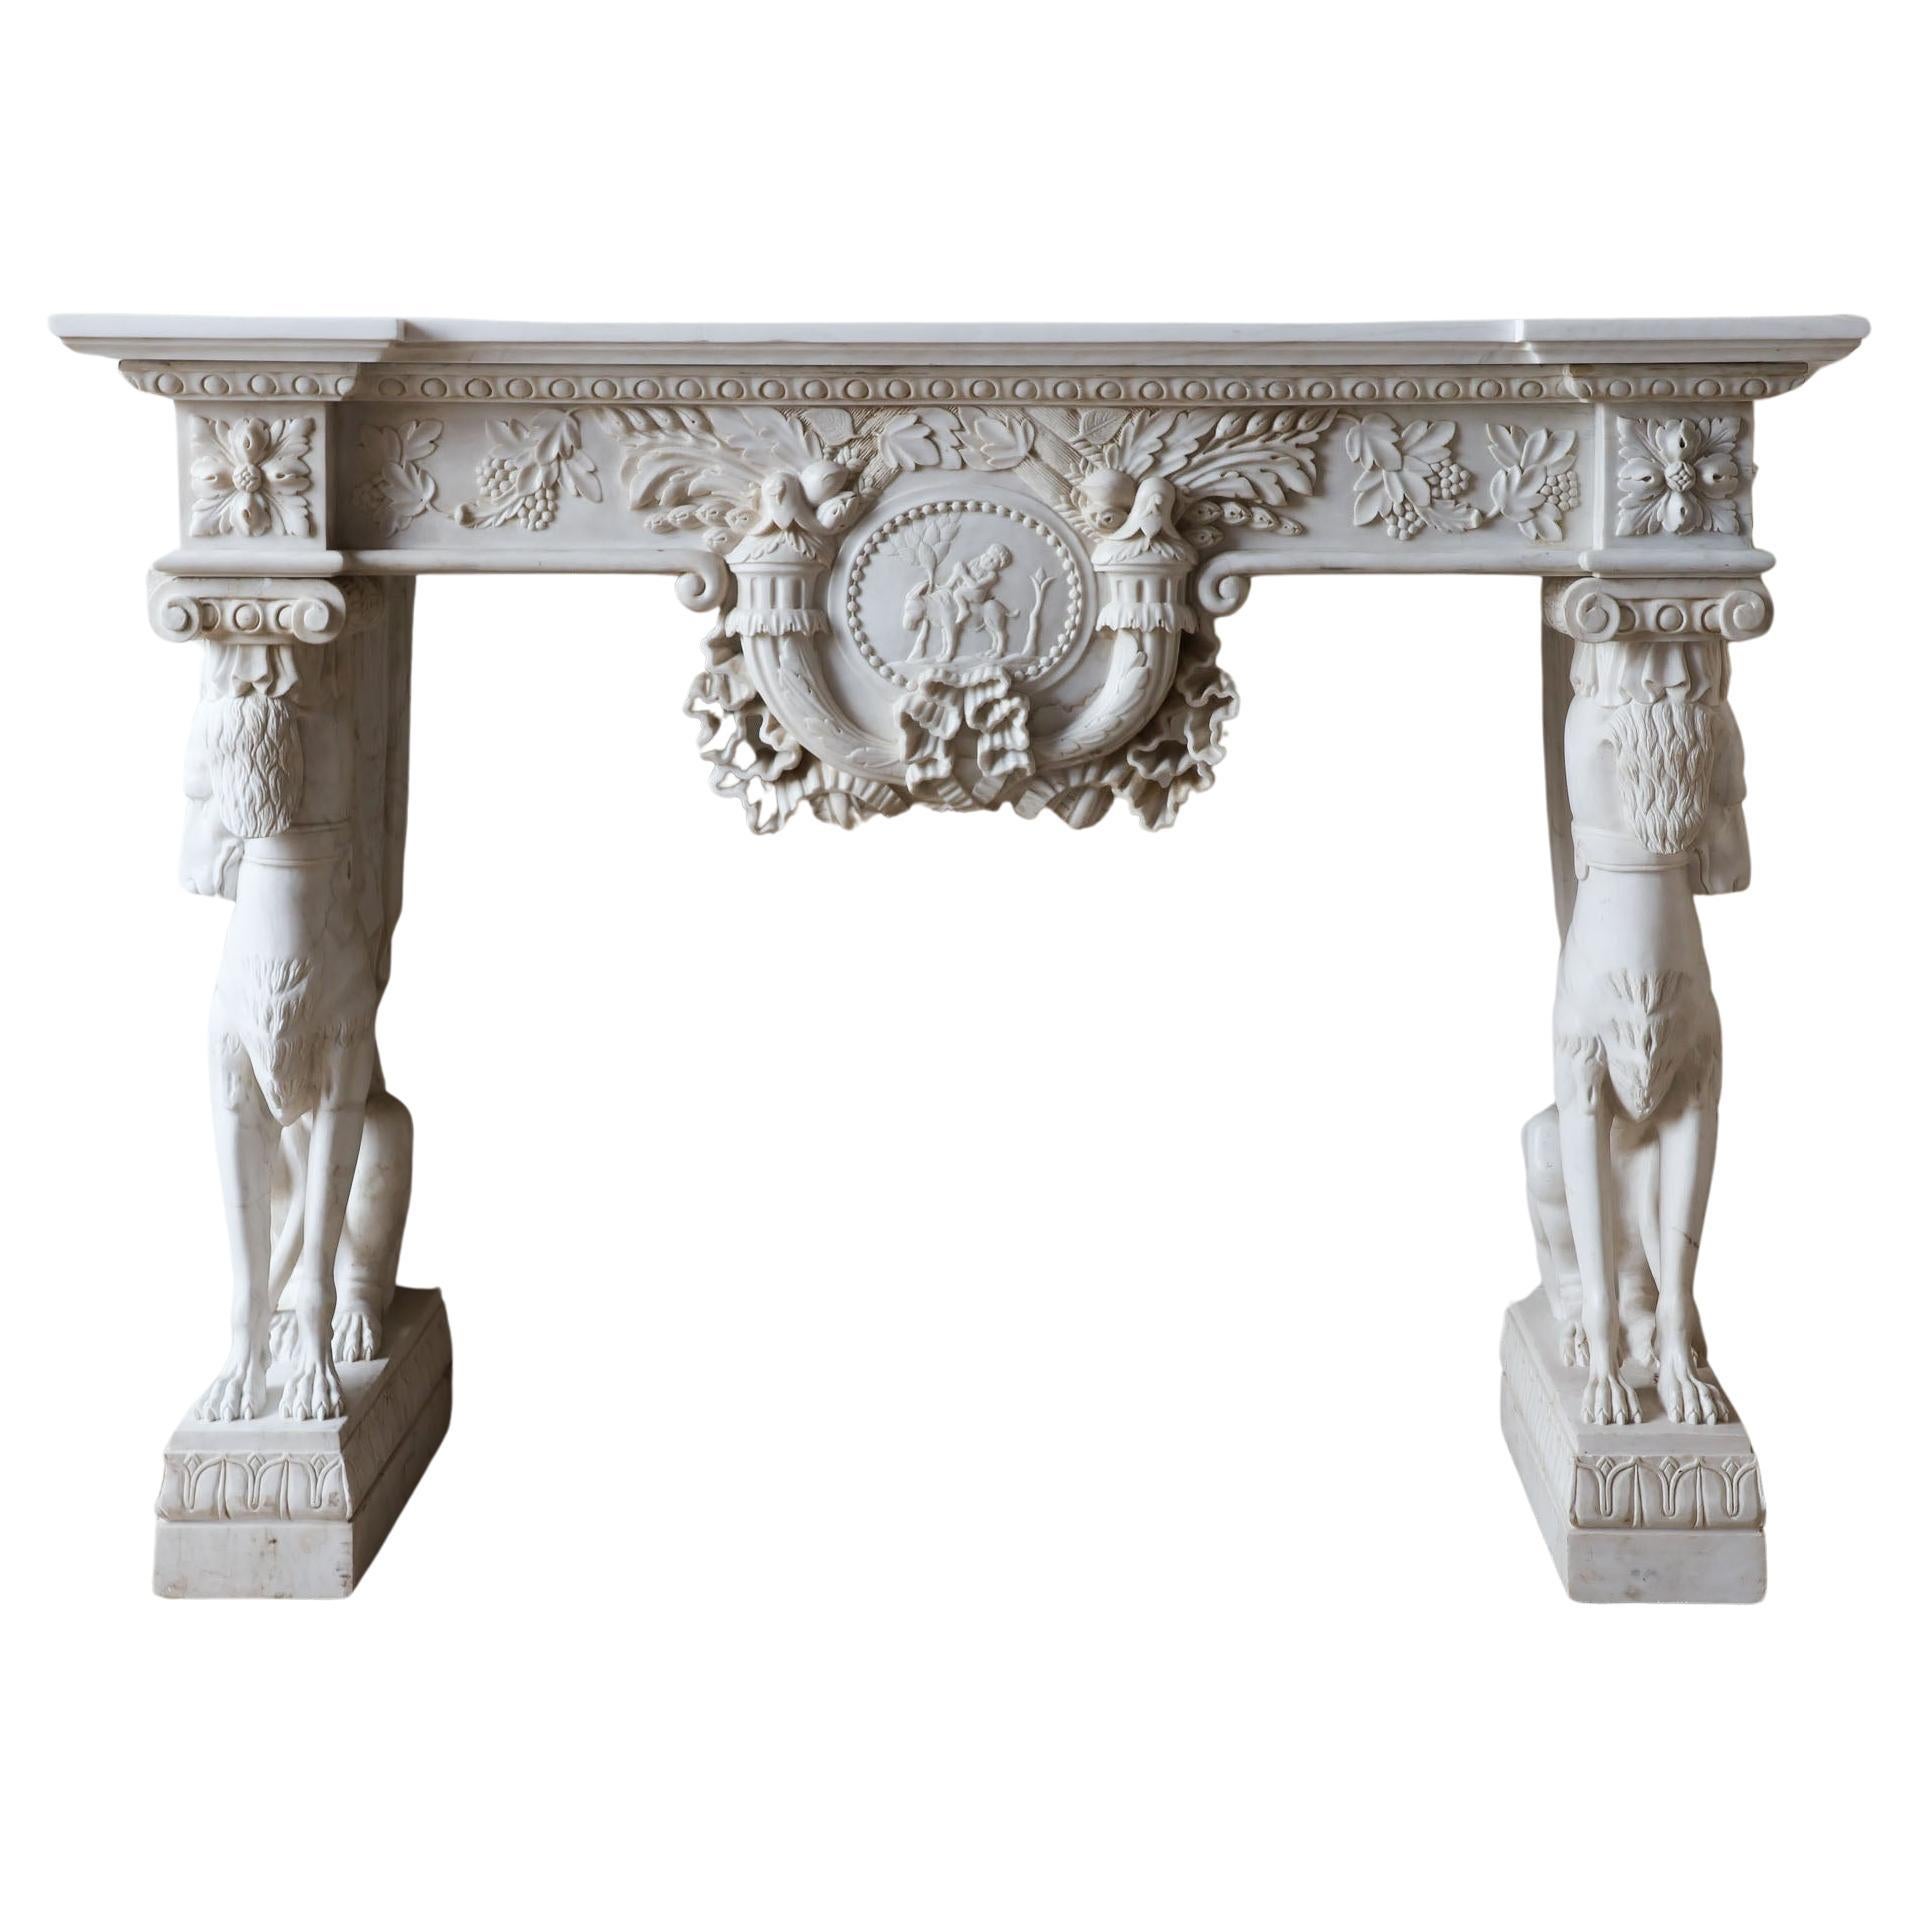 A Rich and Ornate Monumental Mantelpiece Italian Renaissance Revival Style For Sale